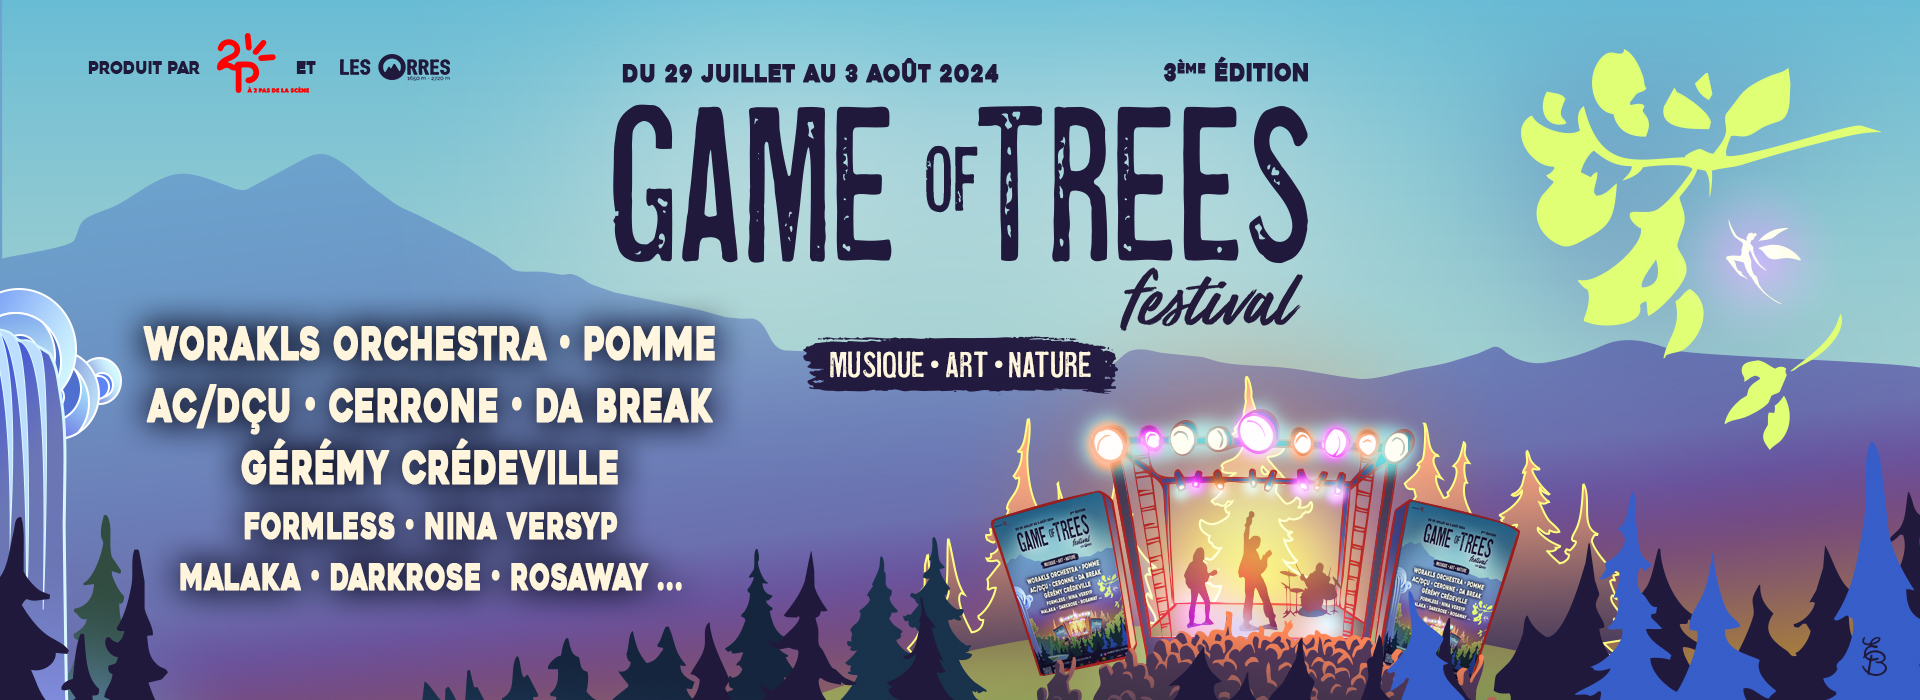 Affiche Festival game of Trees